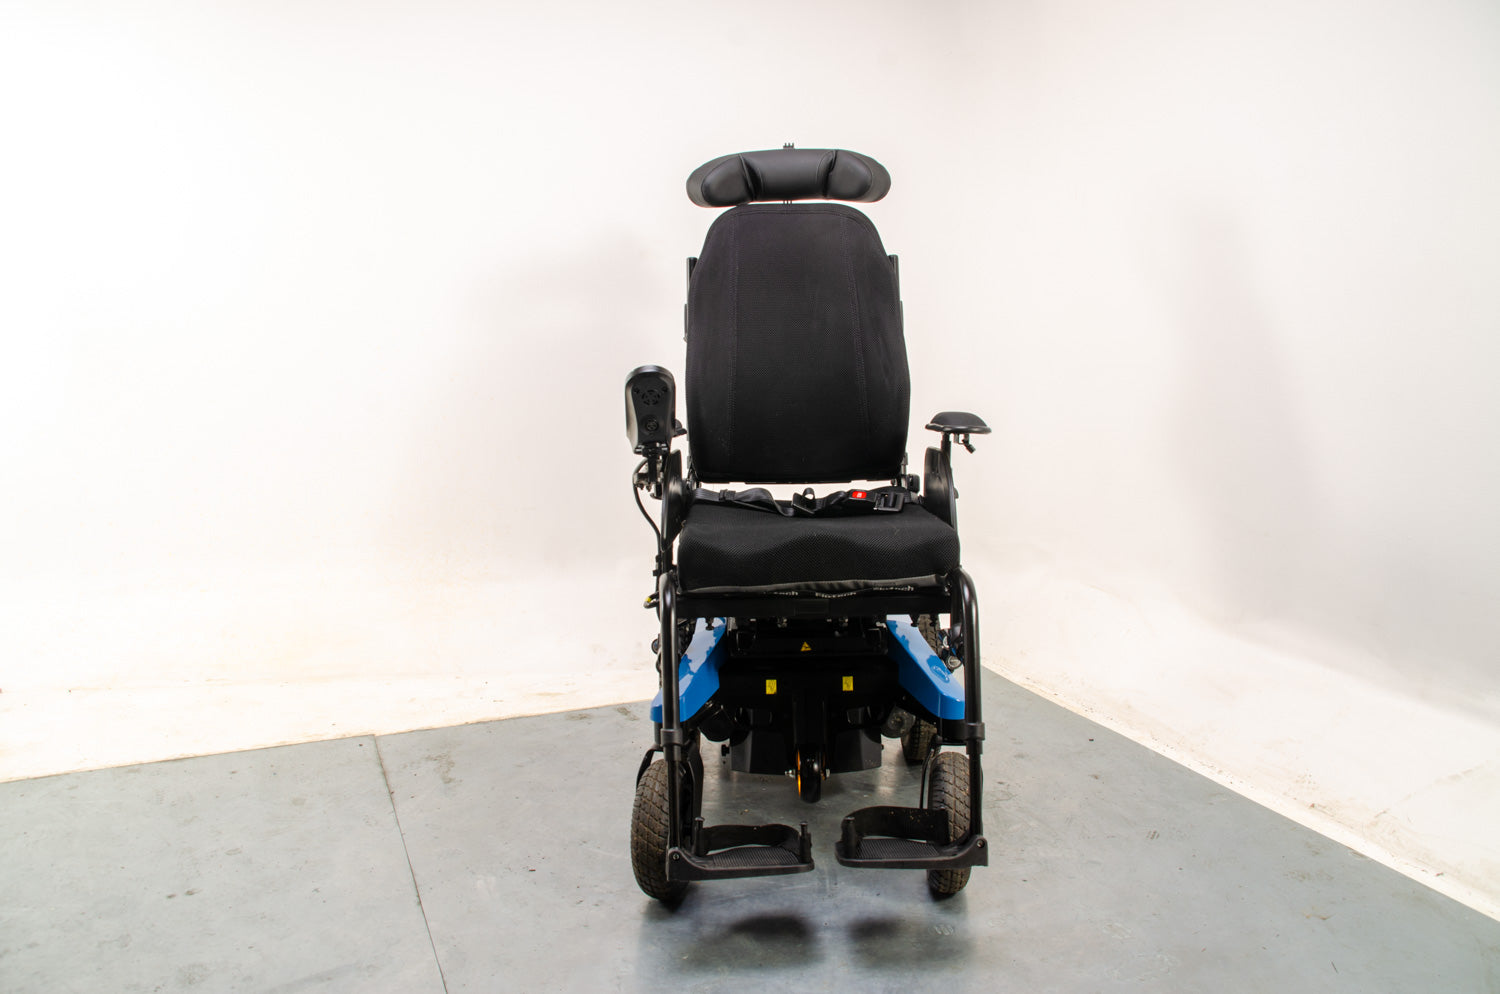 2021 Invacare Aviva RX40 Powerchair with Lift and Raiser 8mph